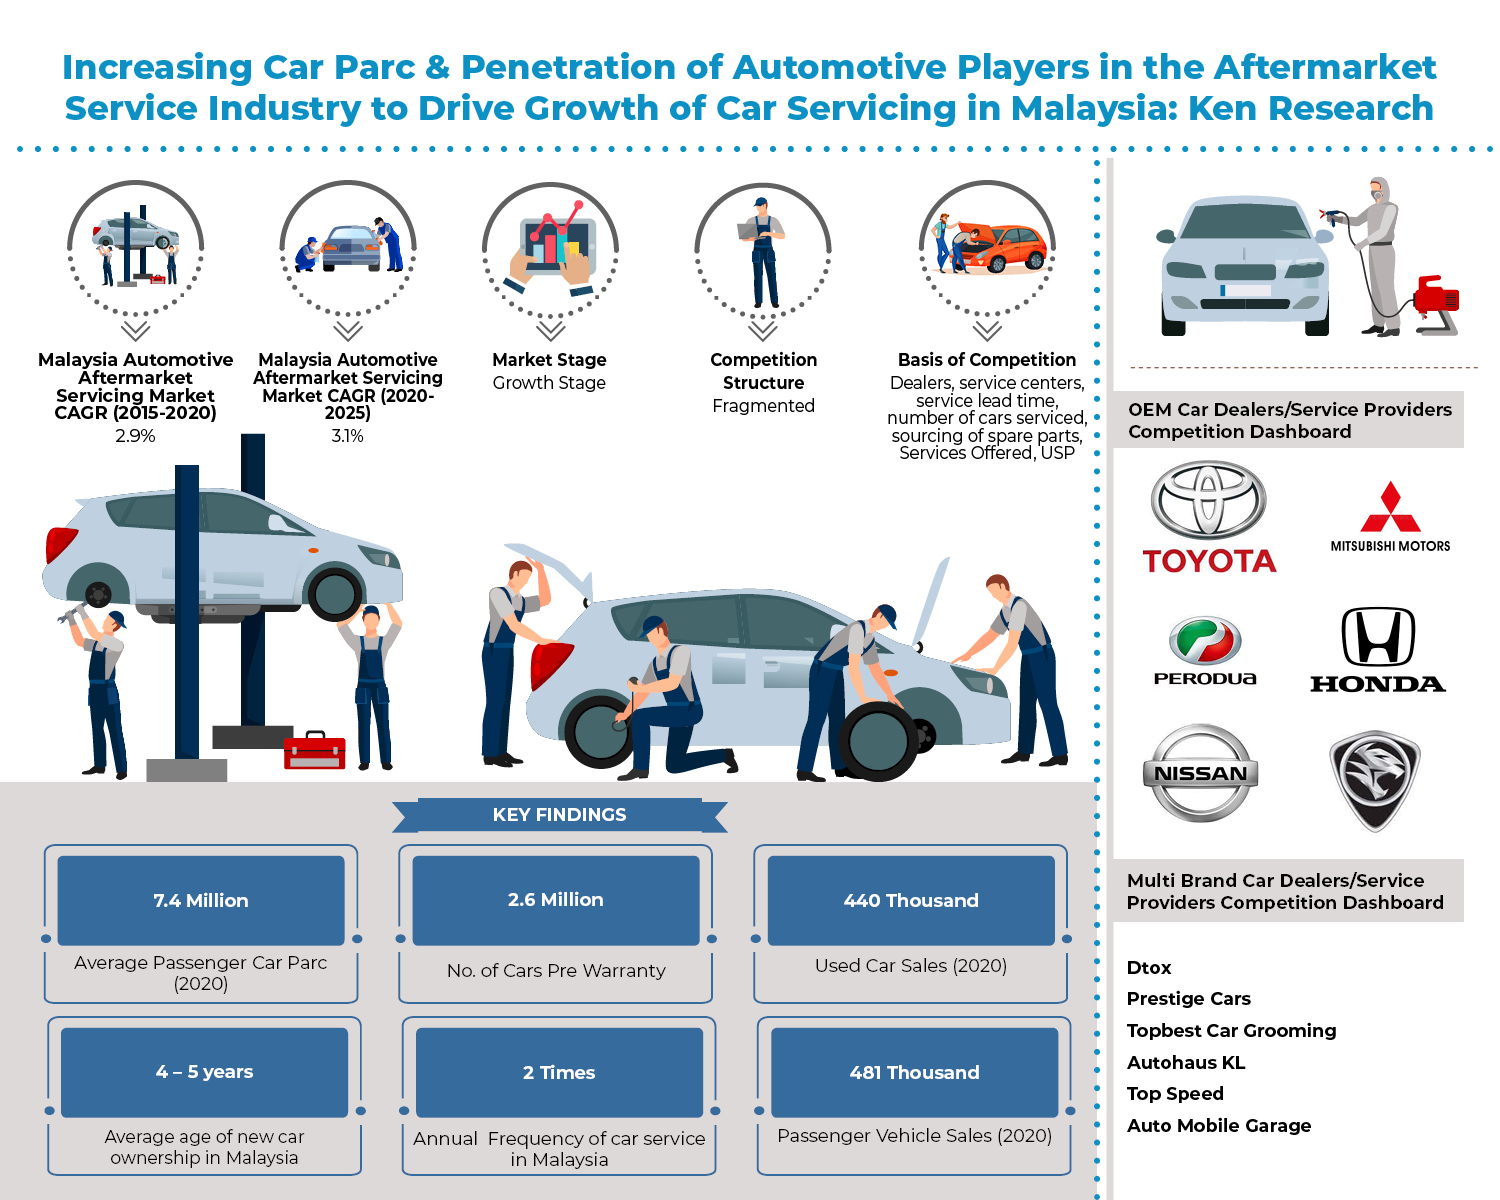 Malaysia Automotive Aftermarket Service Industry Players